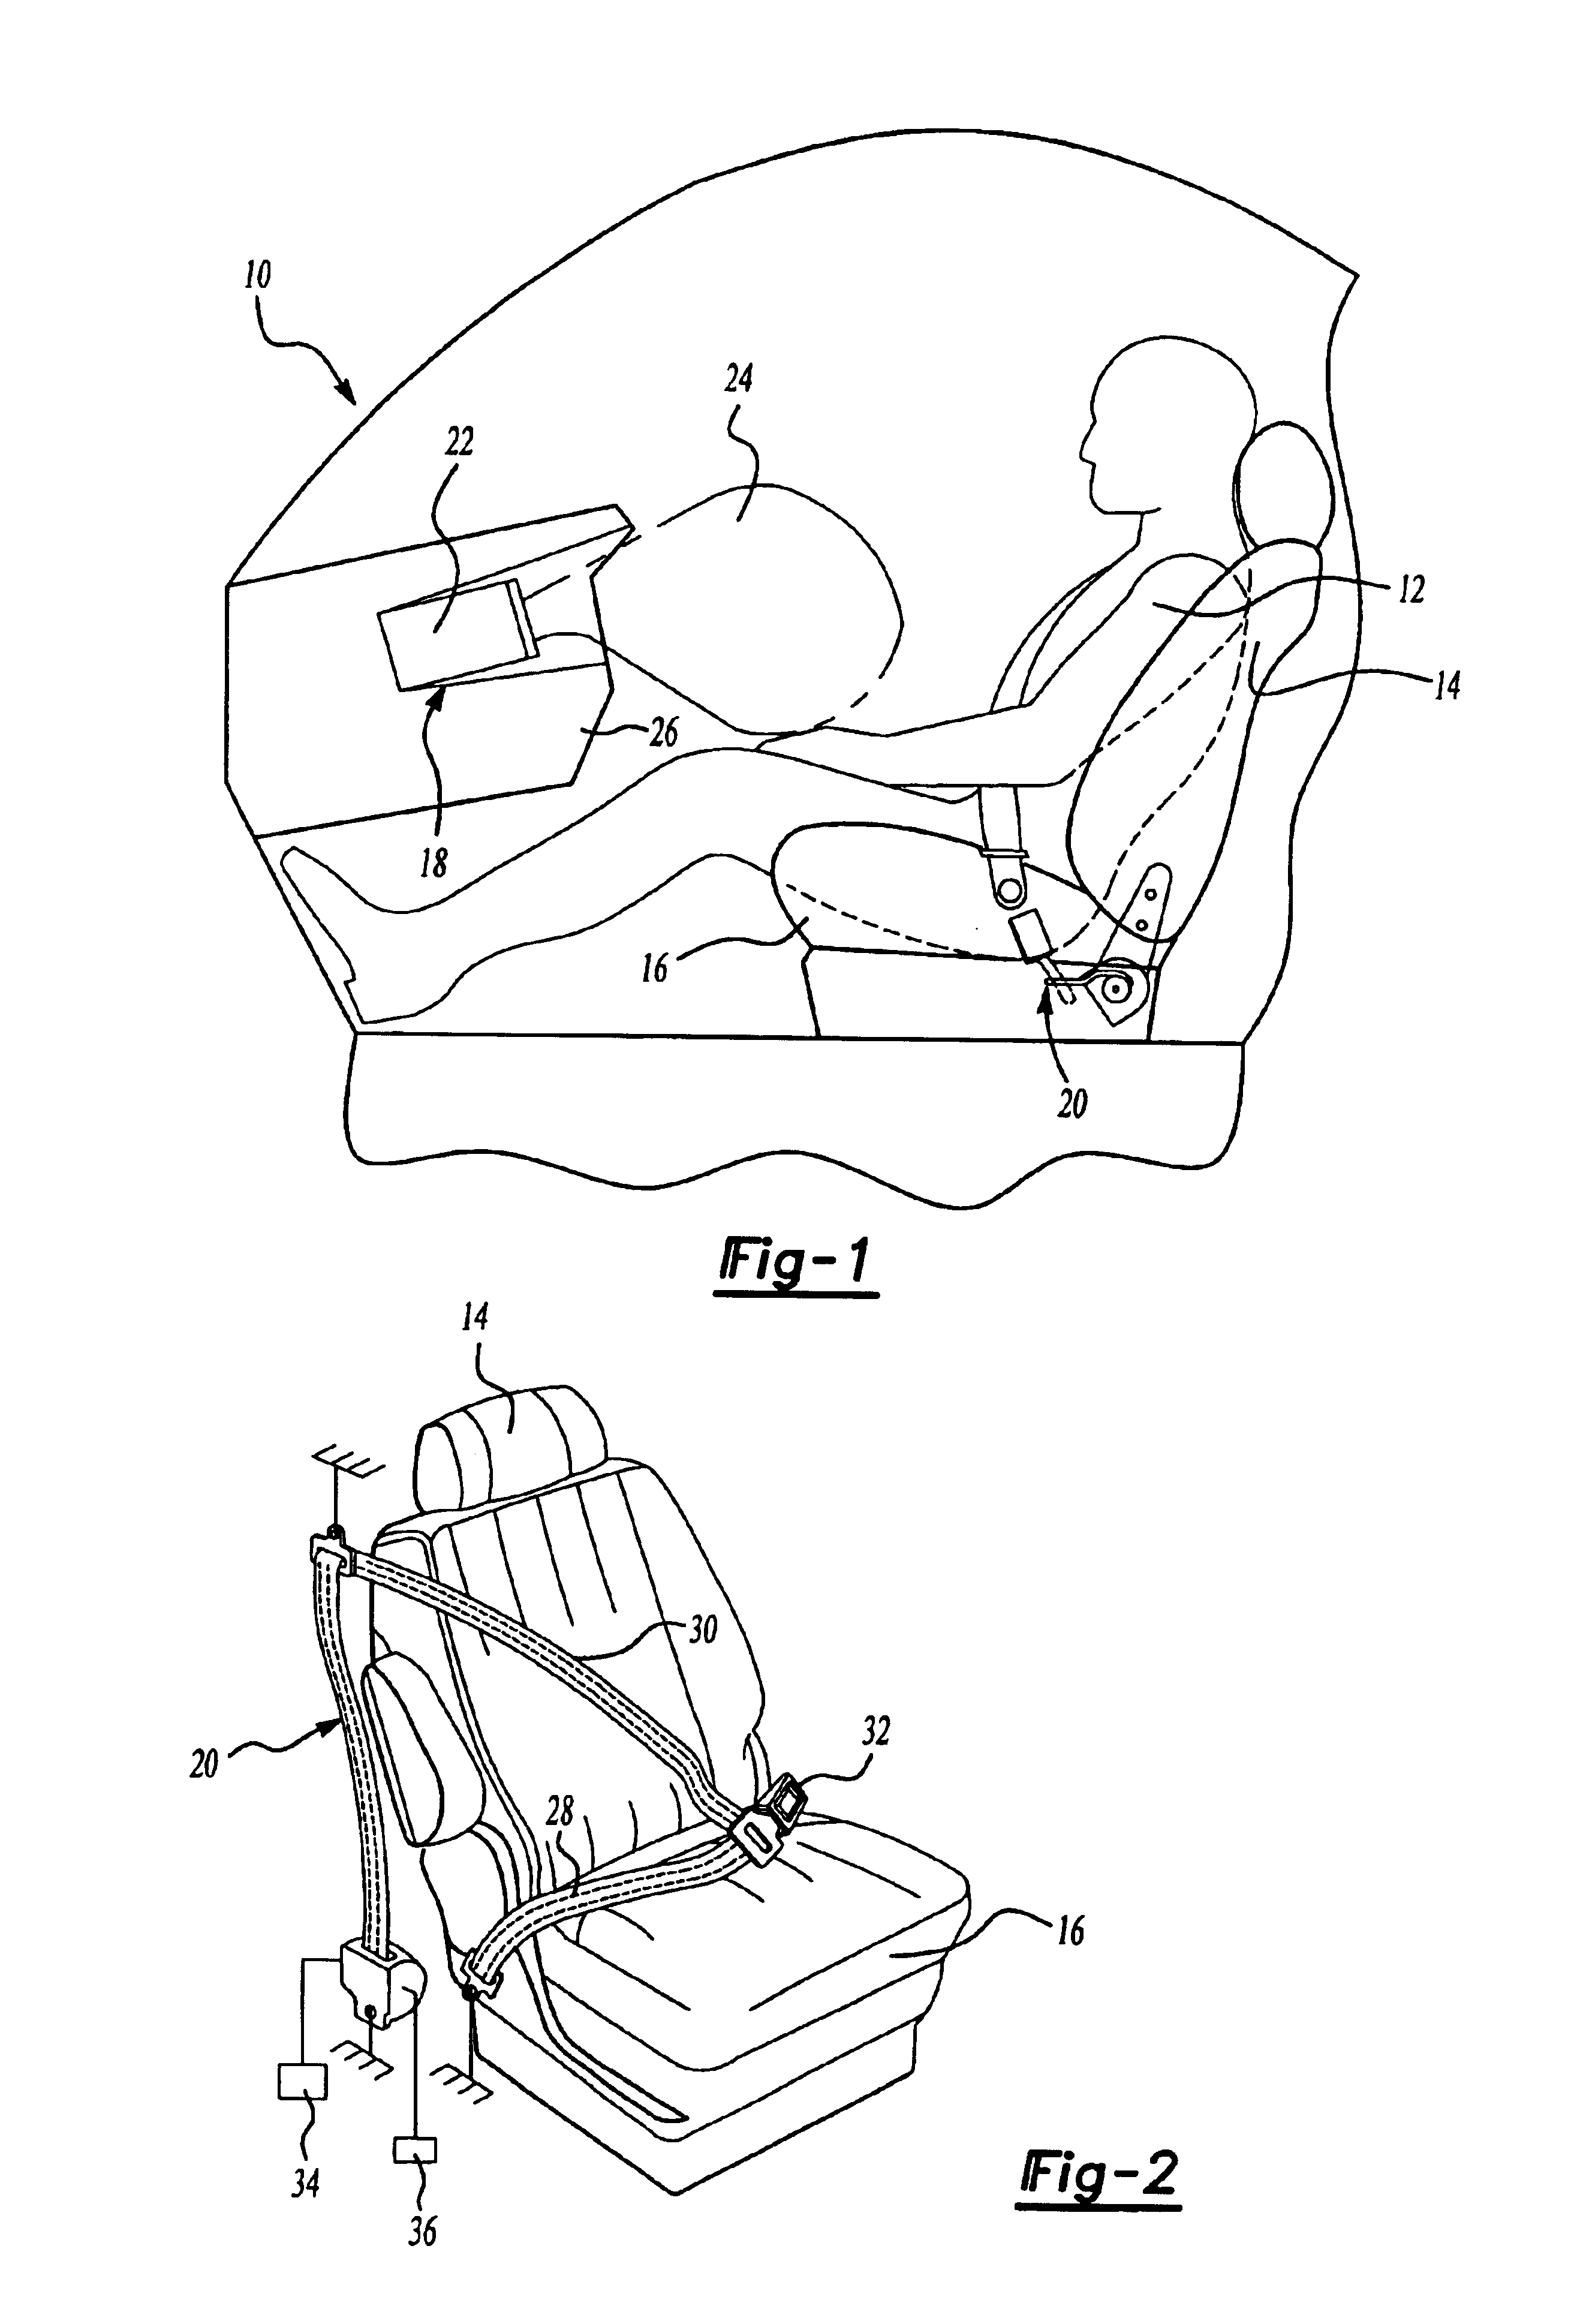 Controller for occupant restraint system